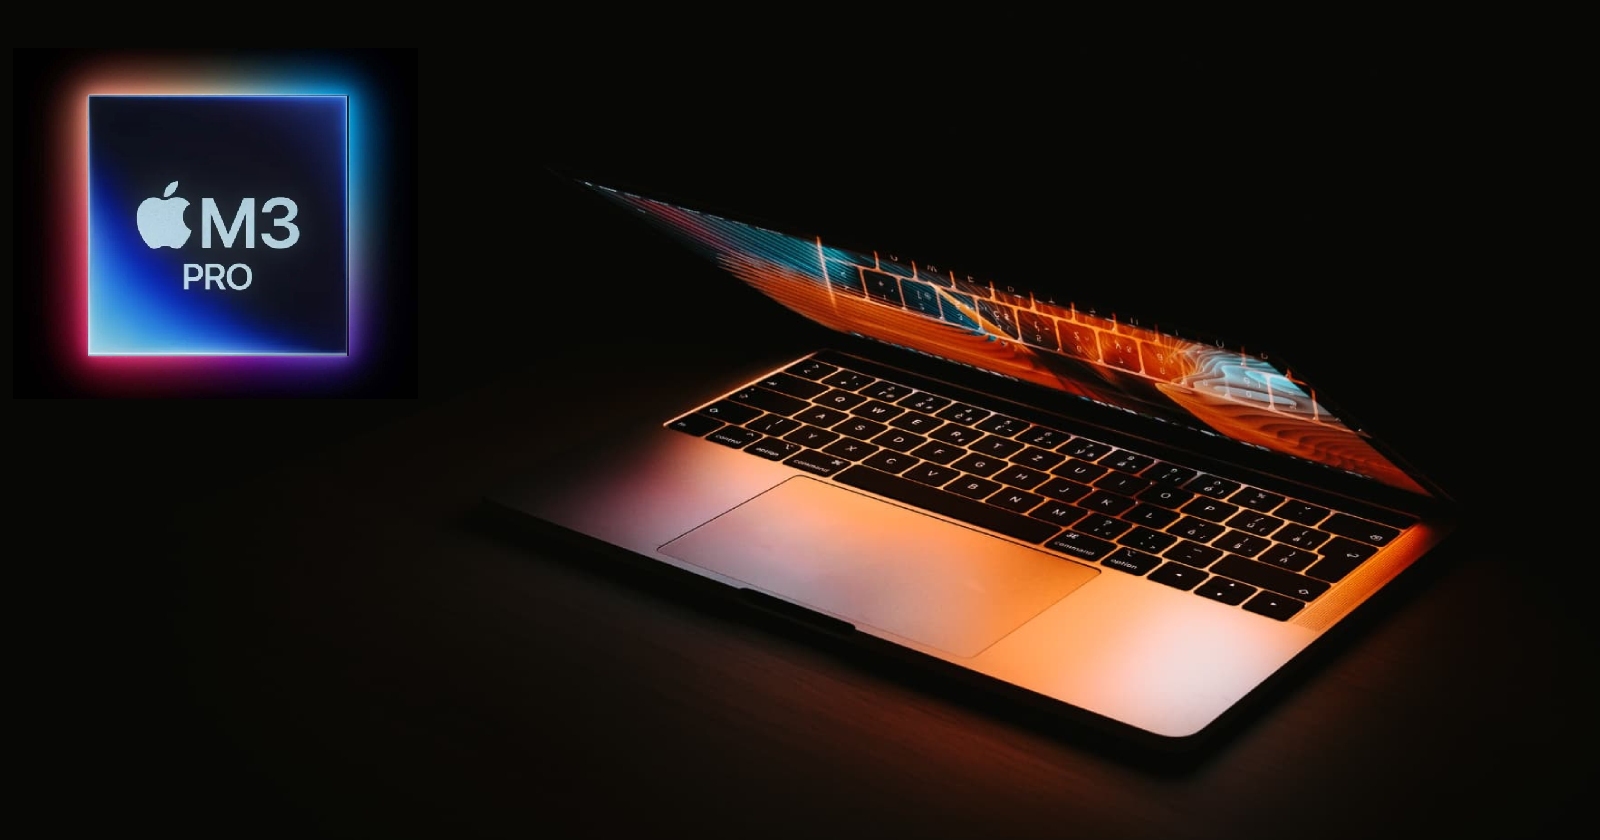 M3 Pro, which will power MacBook Pros, has been introduced!